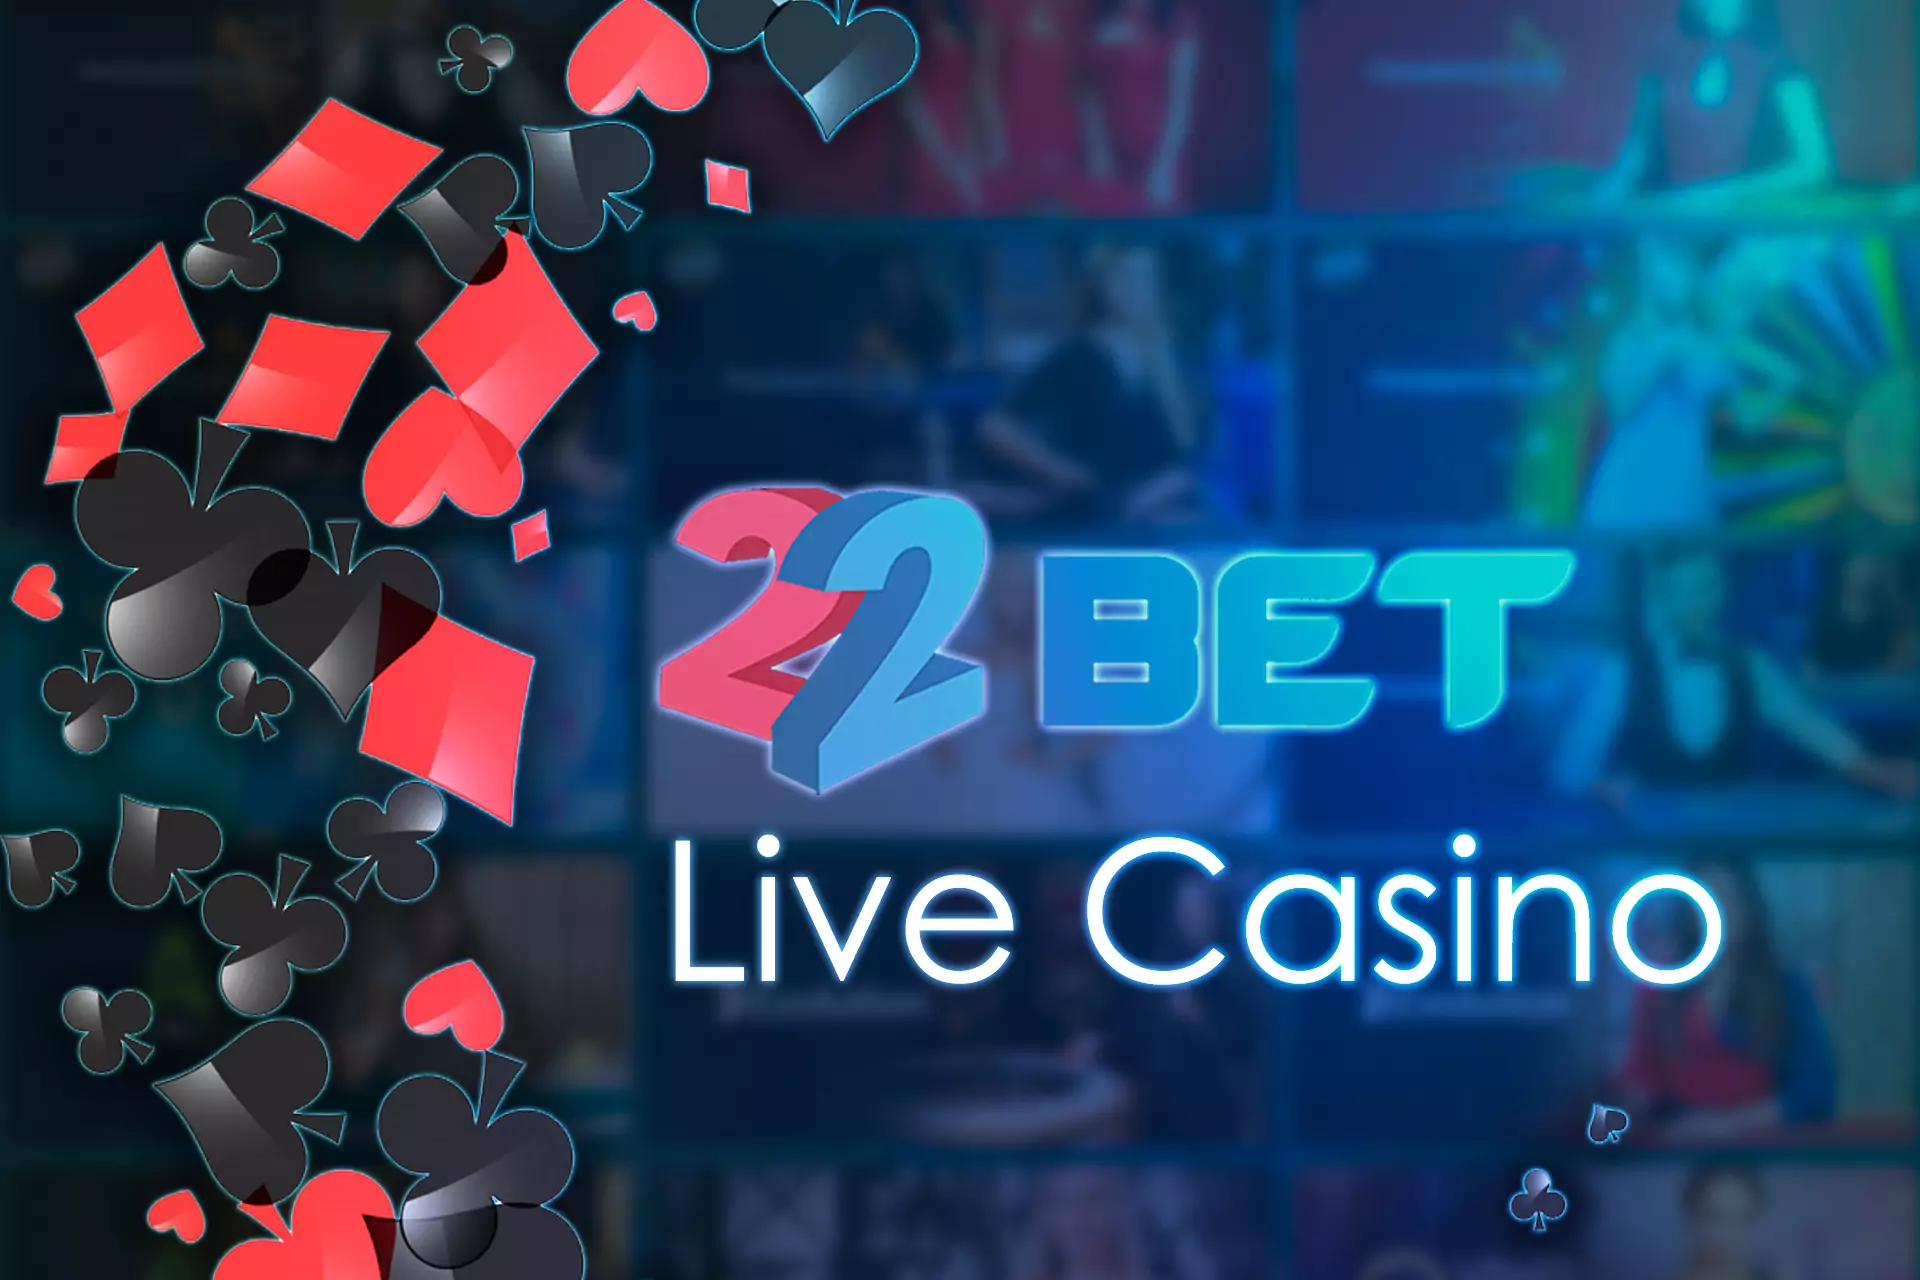 The Live Casino section also is available for 22bet users.